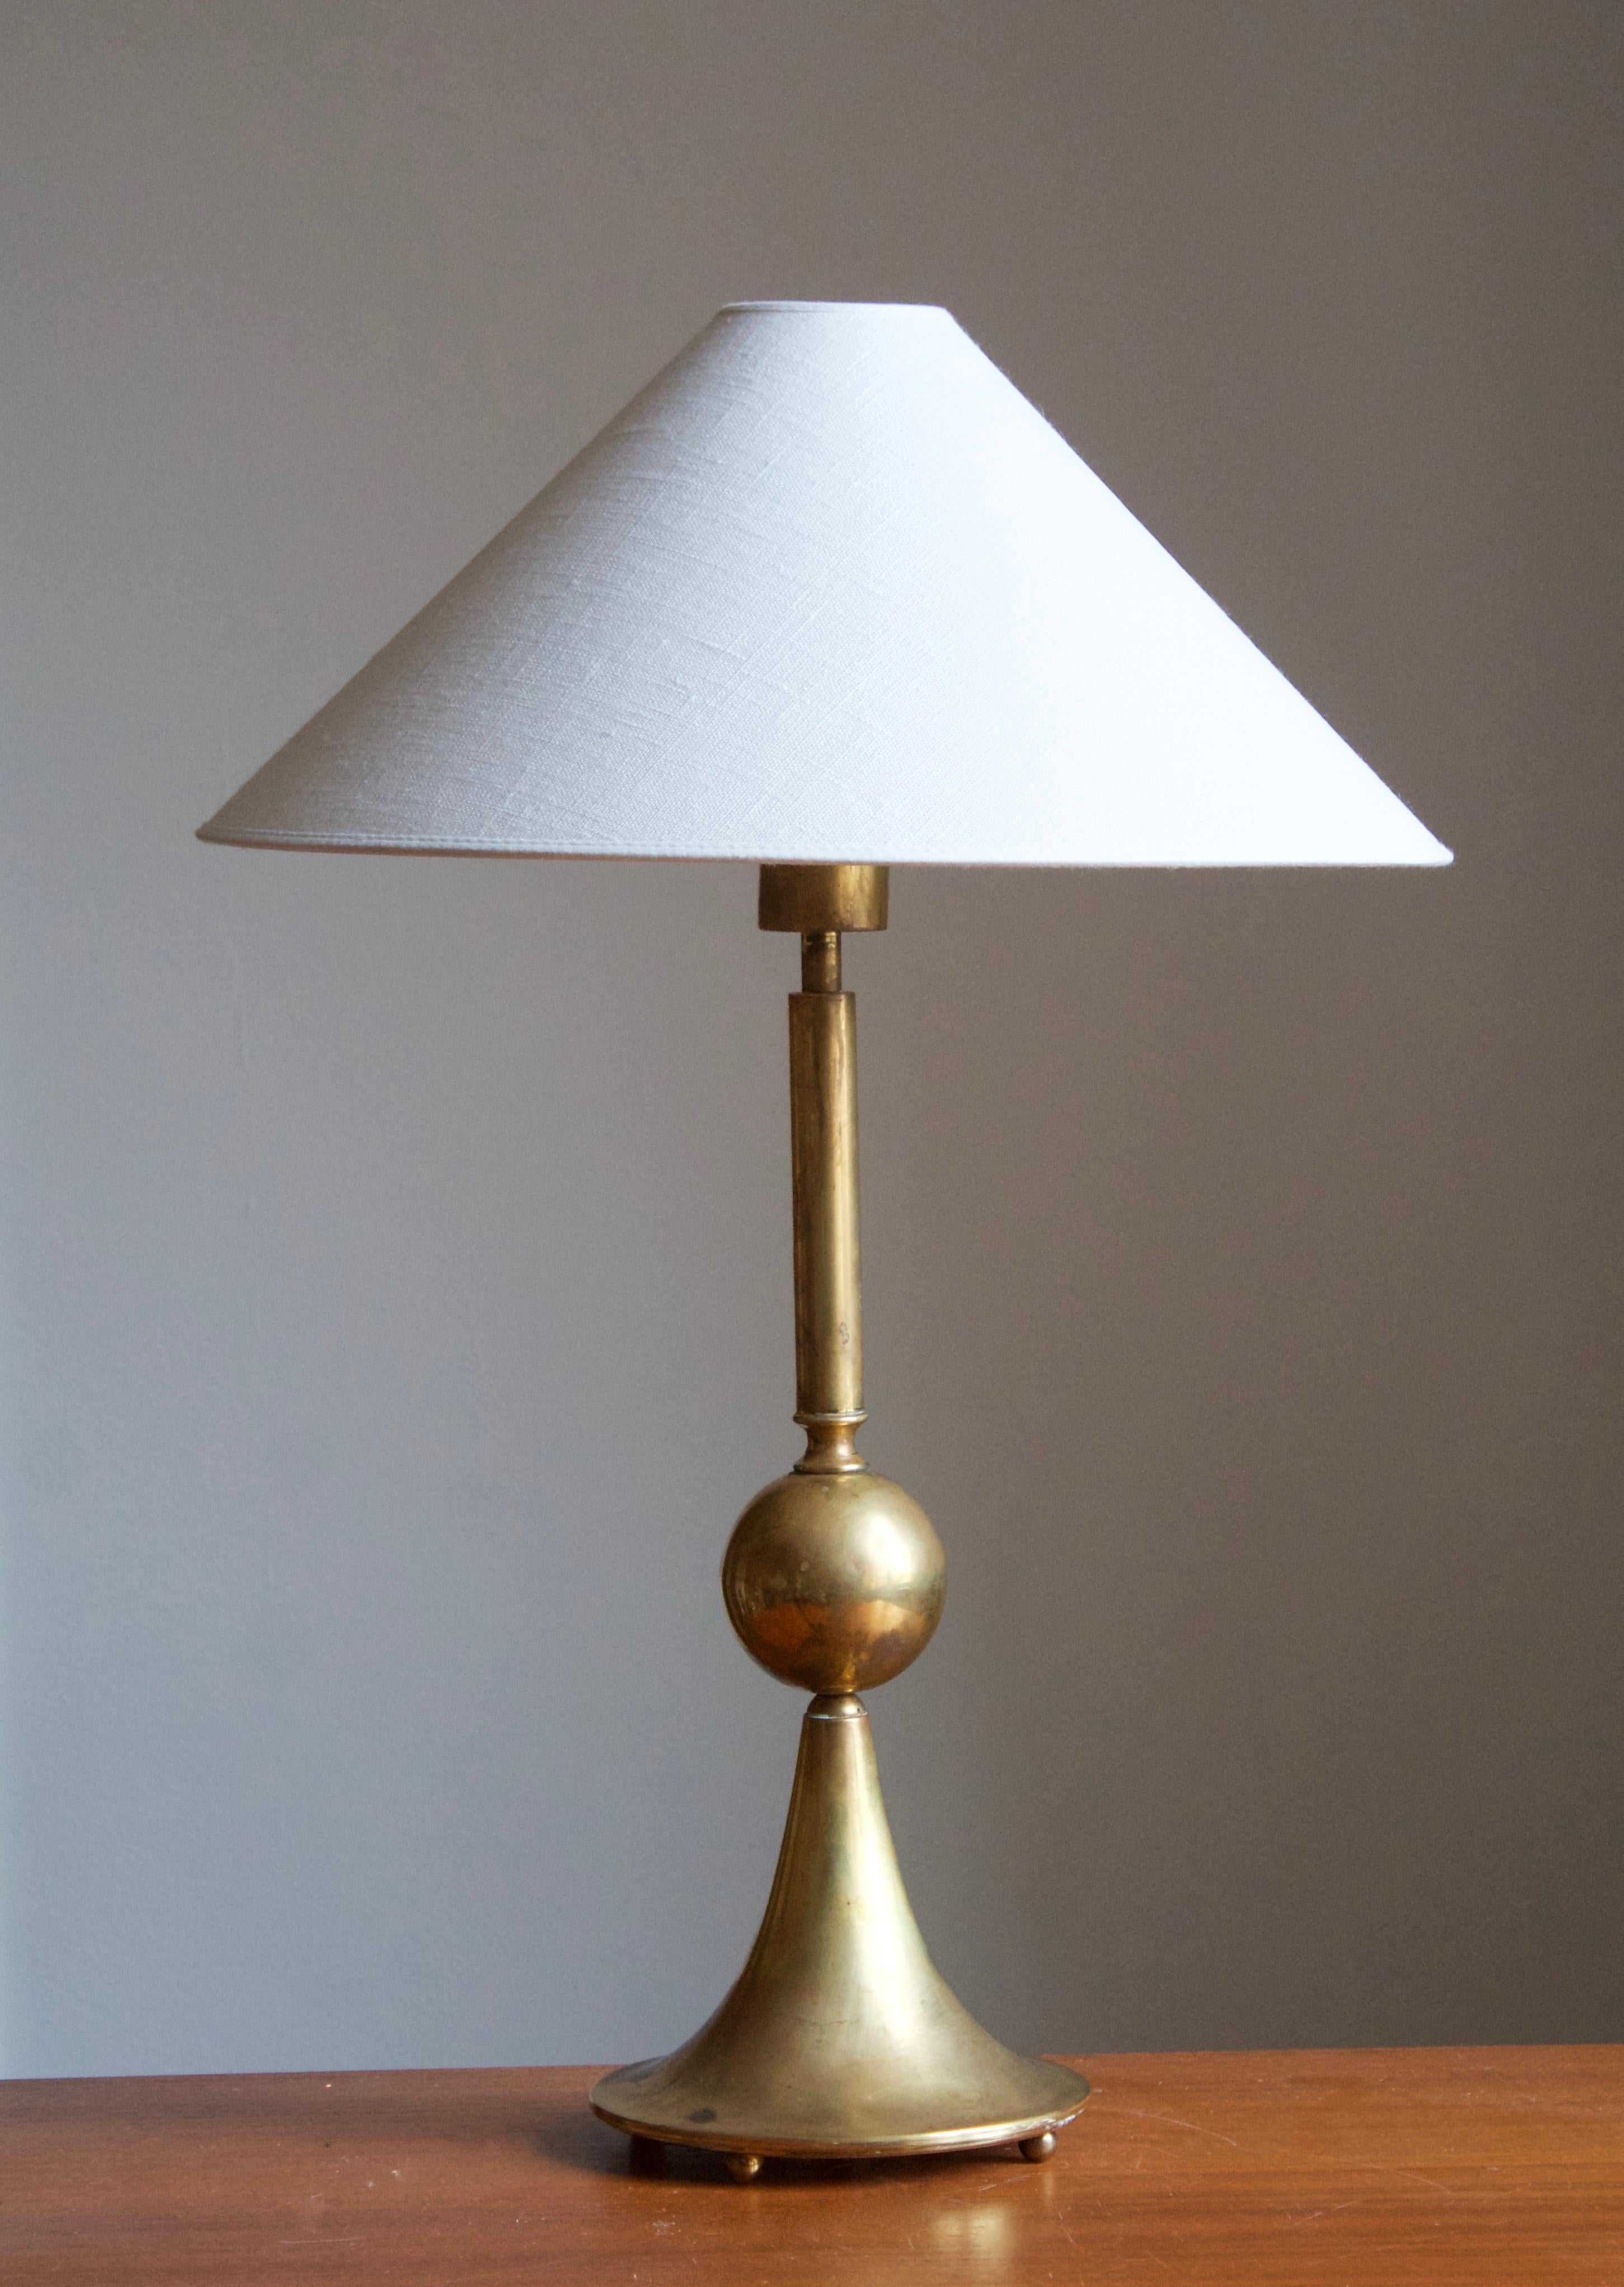 A sizable table lamp. Designed and produced by Sölve Carlsson, Artists Studio, Helsingborg, Sweden, Dated 1991.

Sold without lampshade. Stated dimensions exclude lampshade, height includes socket.

Other designers of the period include Paavo